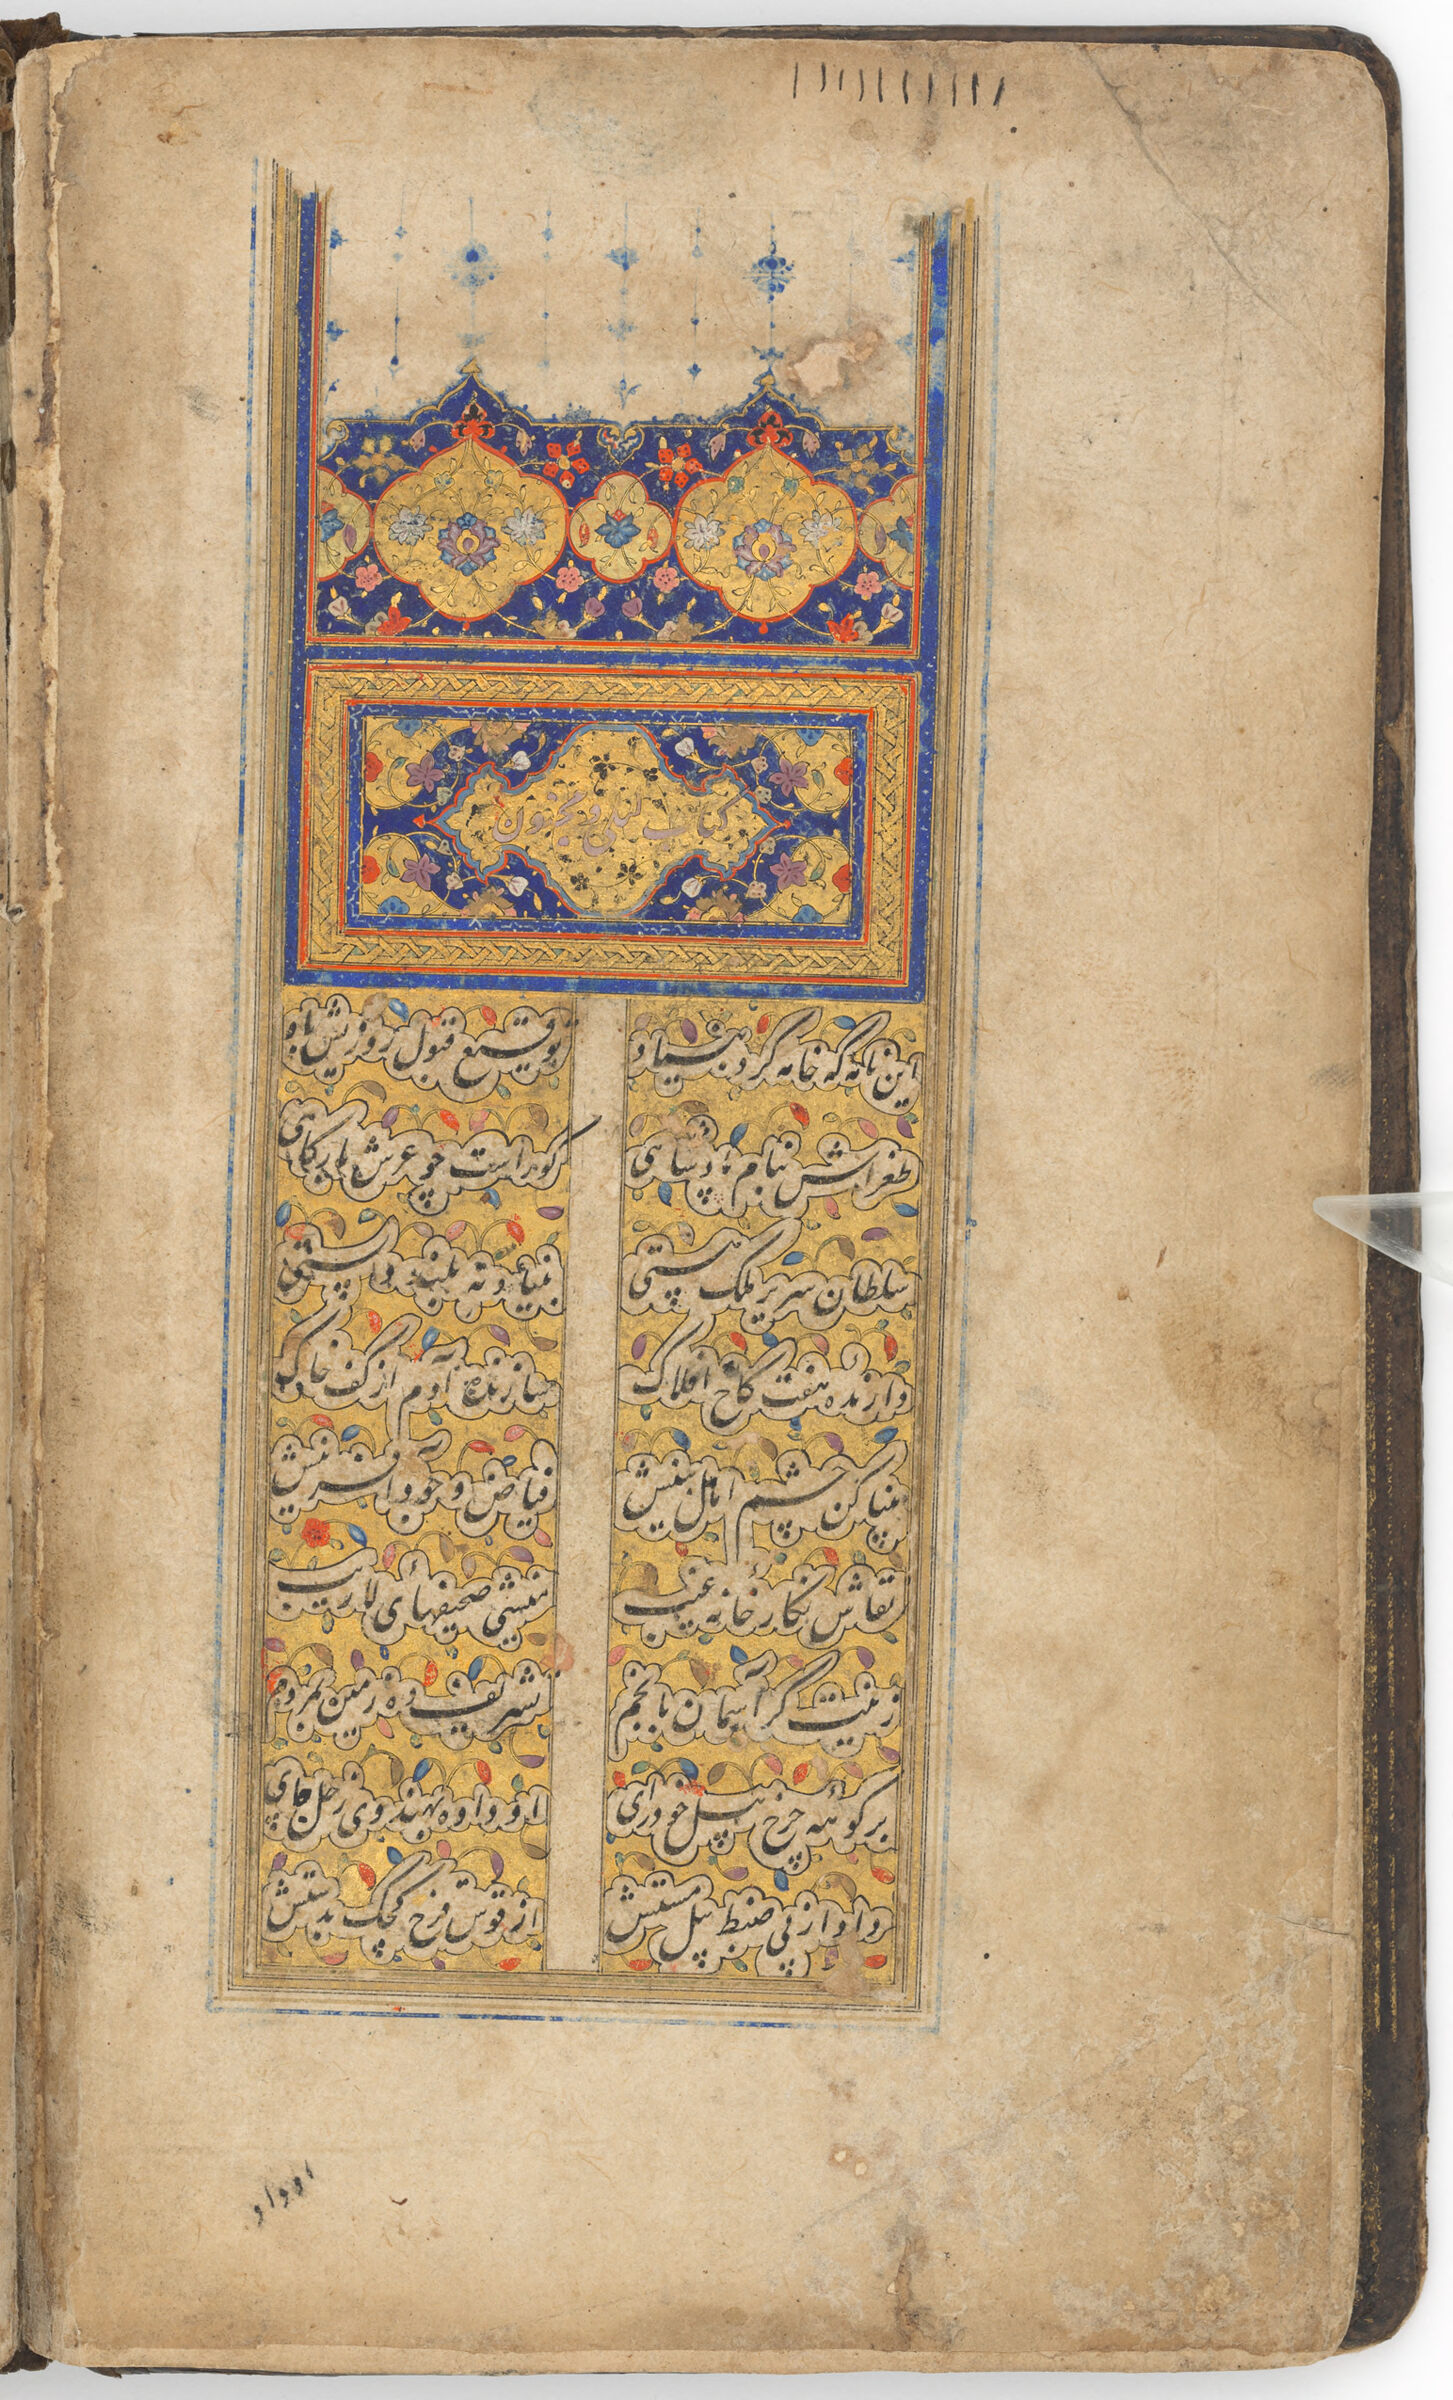 Illuminated Sarlawh Of The Layla And Majnun (Later Notes Recto; Text Verso Of Folio 3), From A Manuscript Of Layla And Majnun By Jami